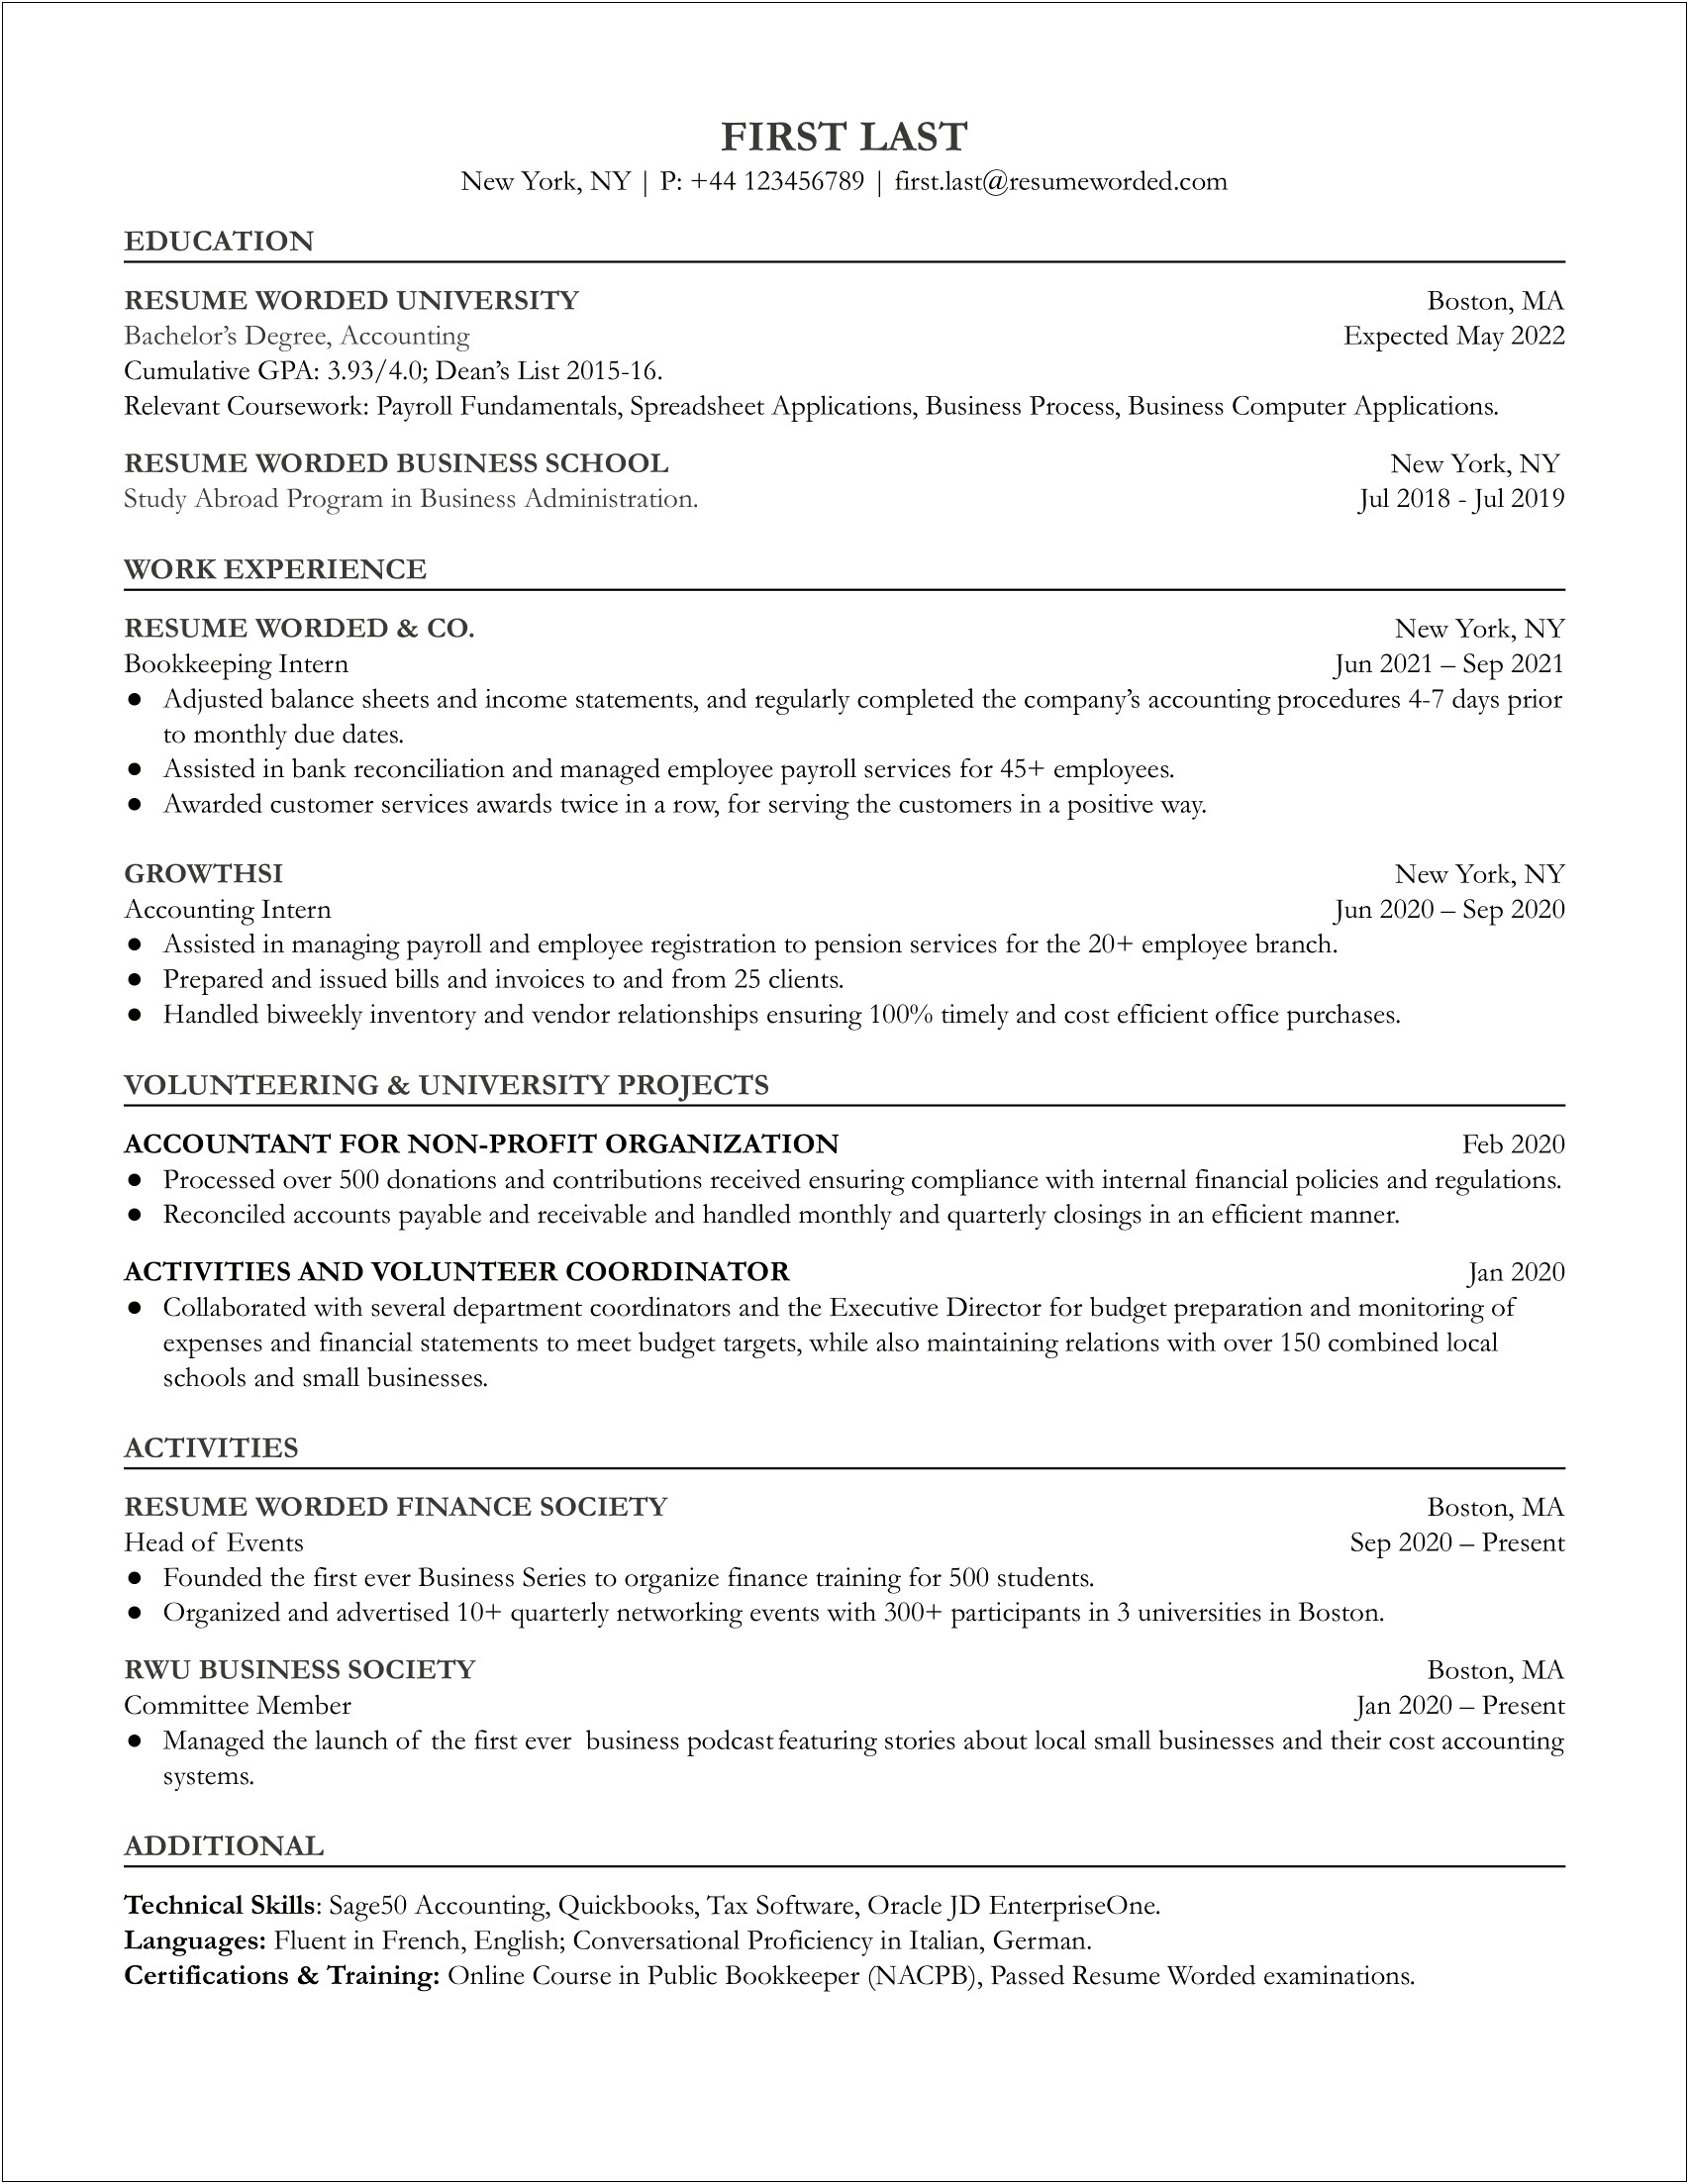 Resume Objective For Entry Level Bookkeeping Position